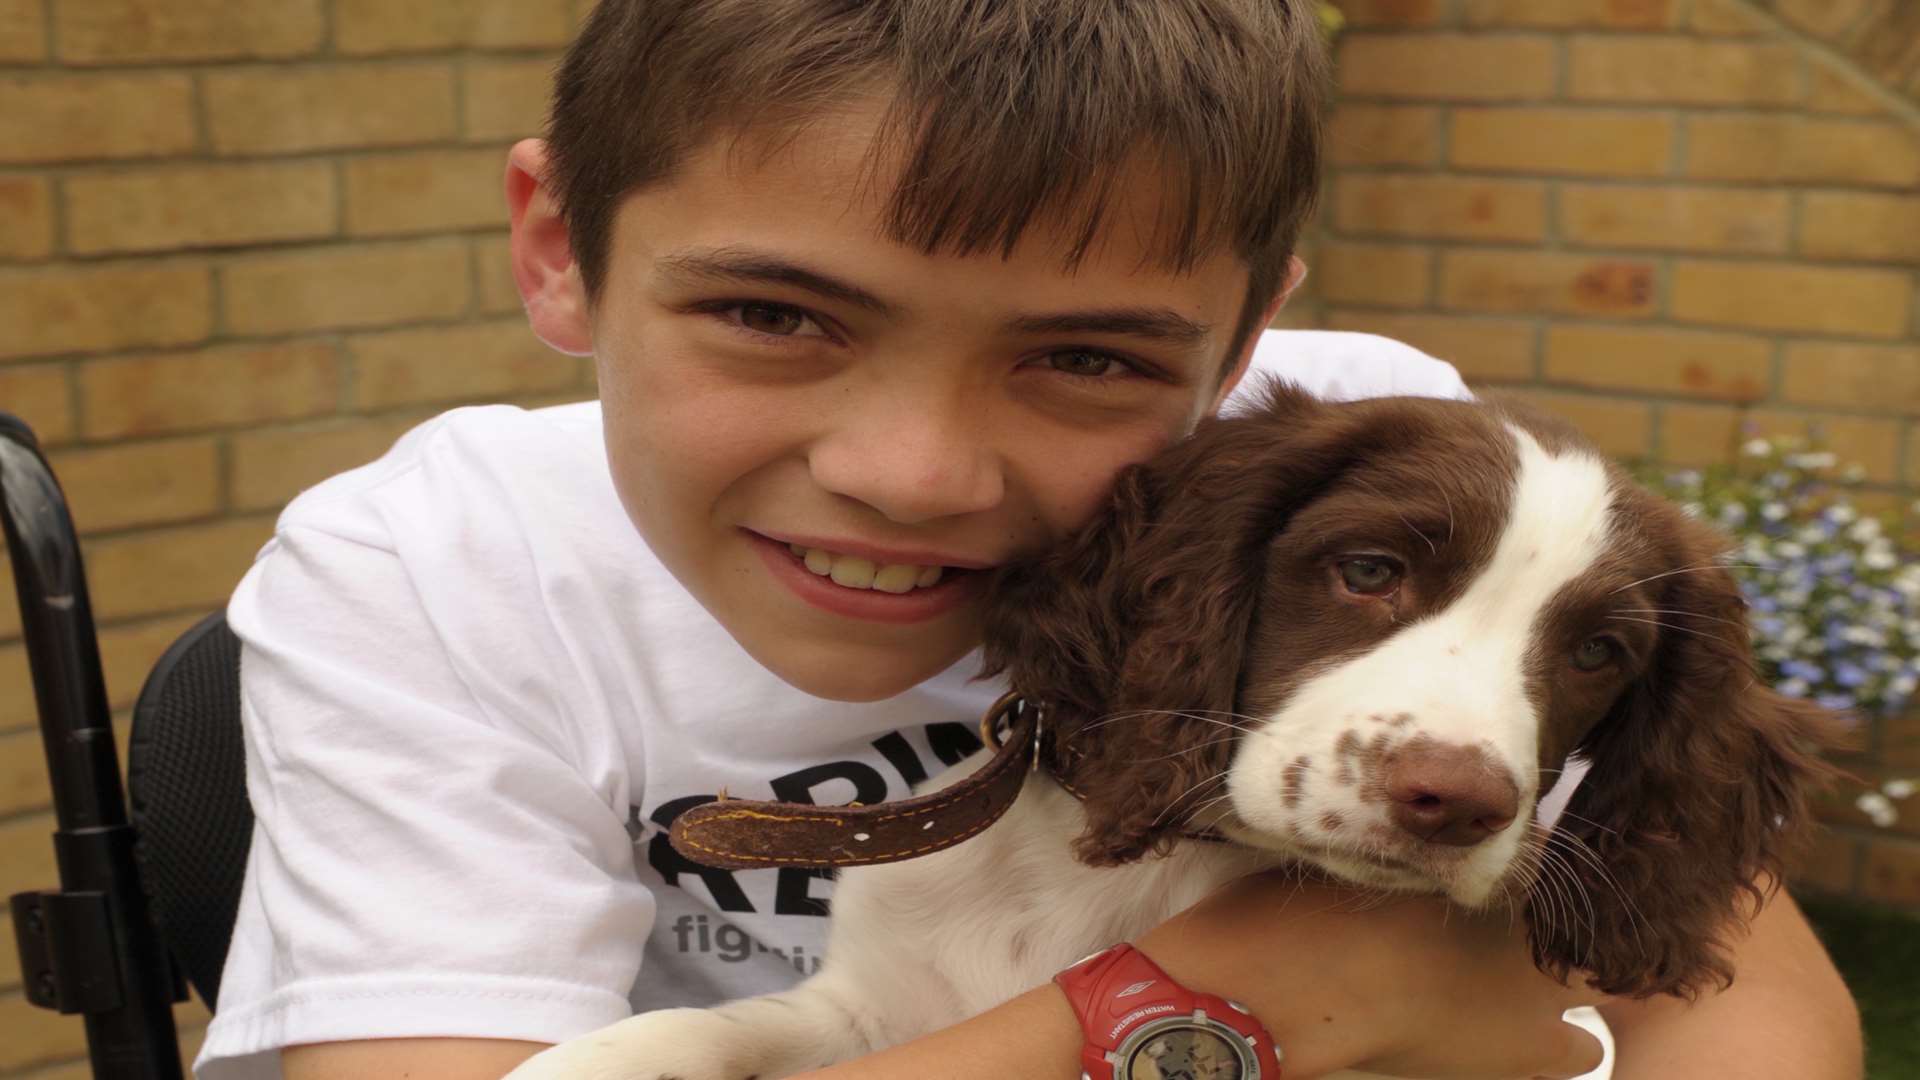 A specialist dietary treatment is keeping Jake alive, his family believe